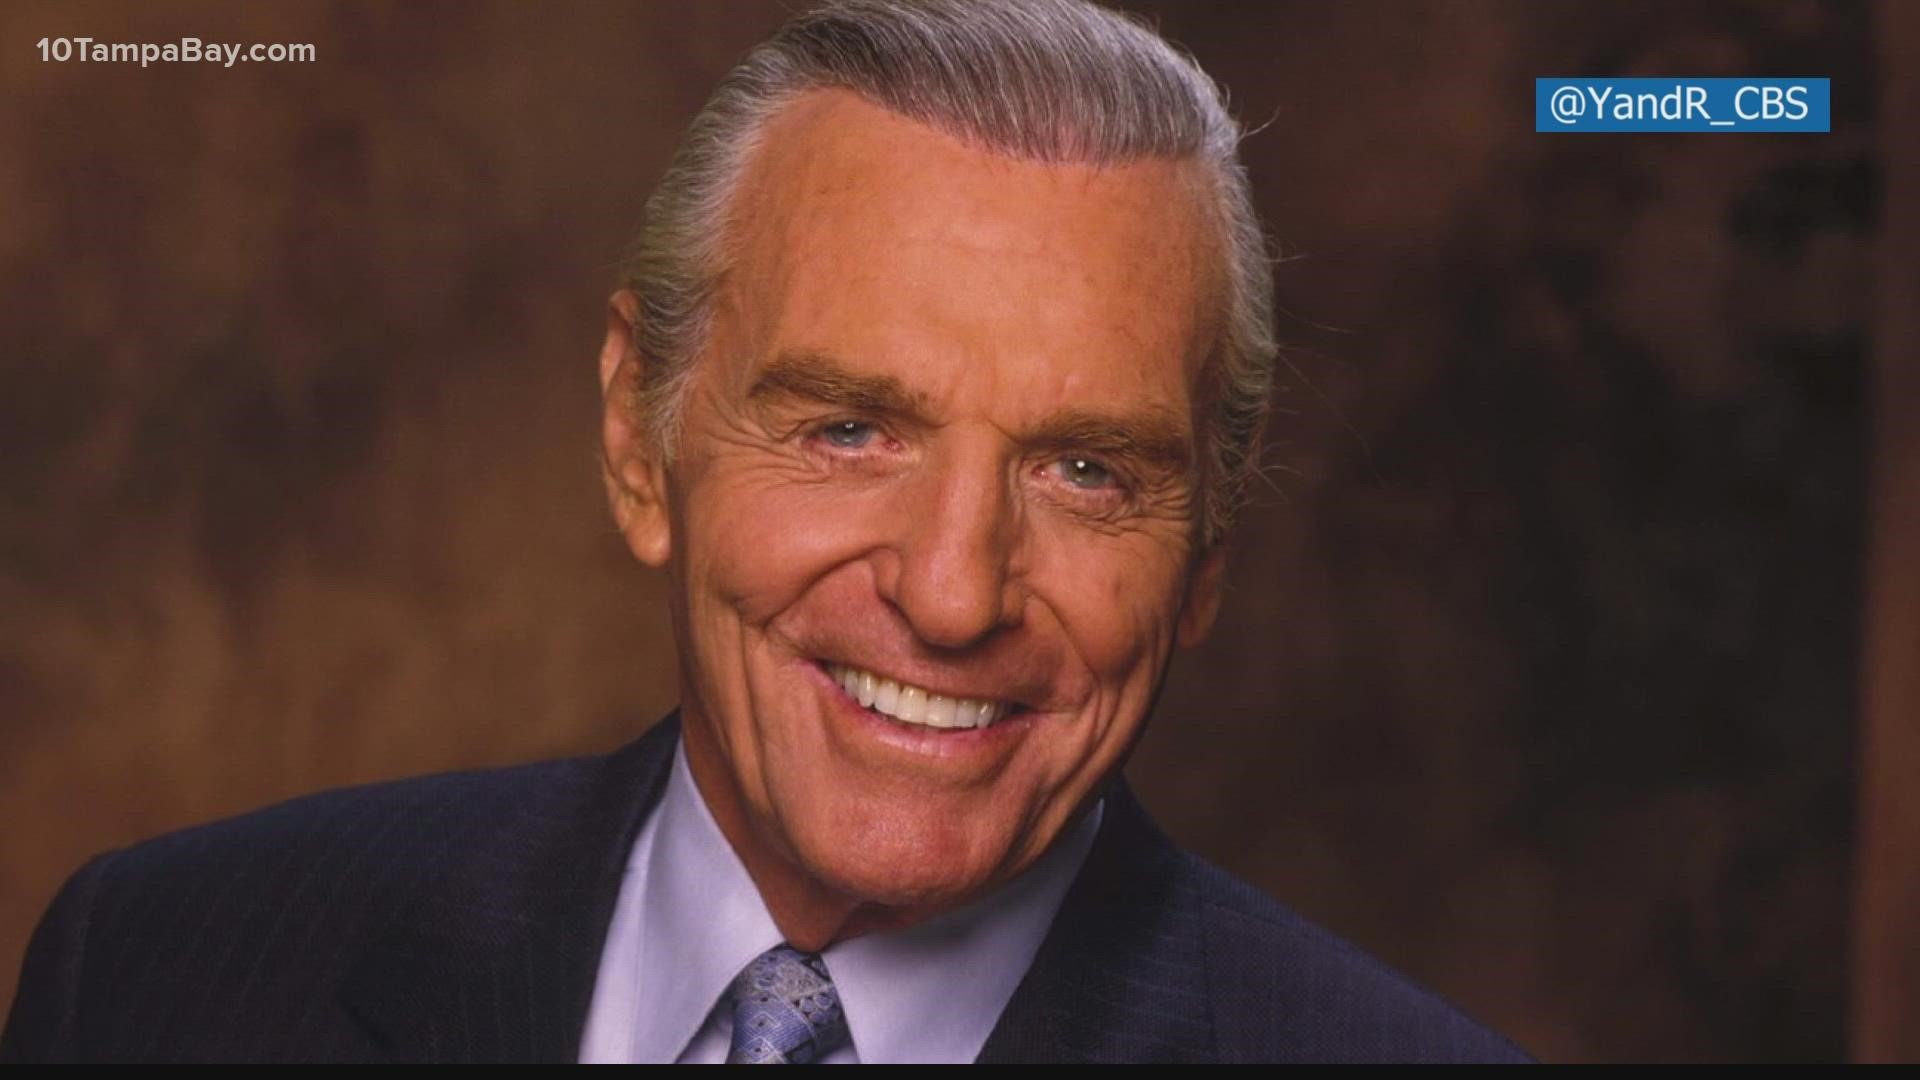 Douglas played John Abbott on the long-running soap opera for more than 30 years.